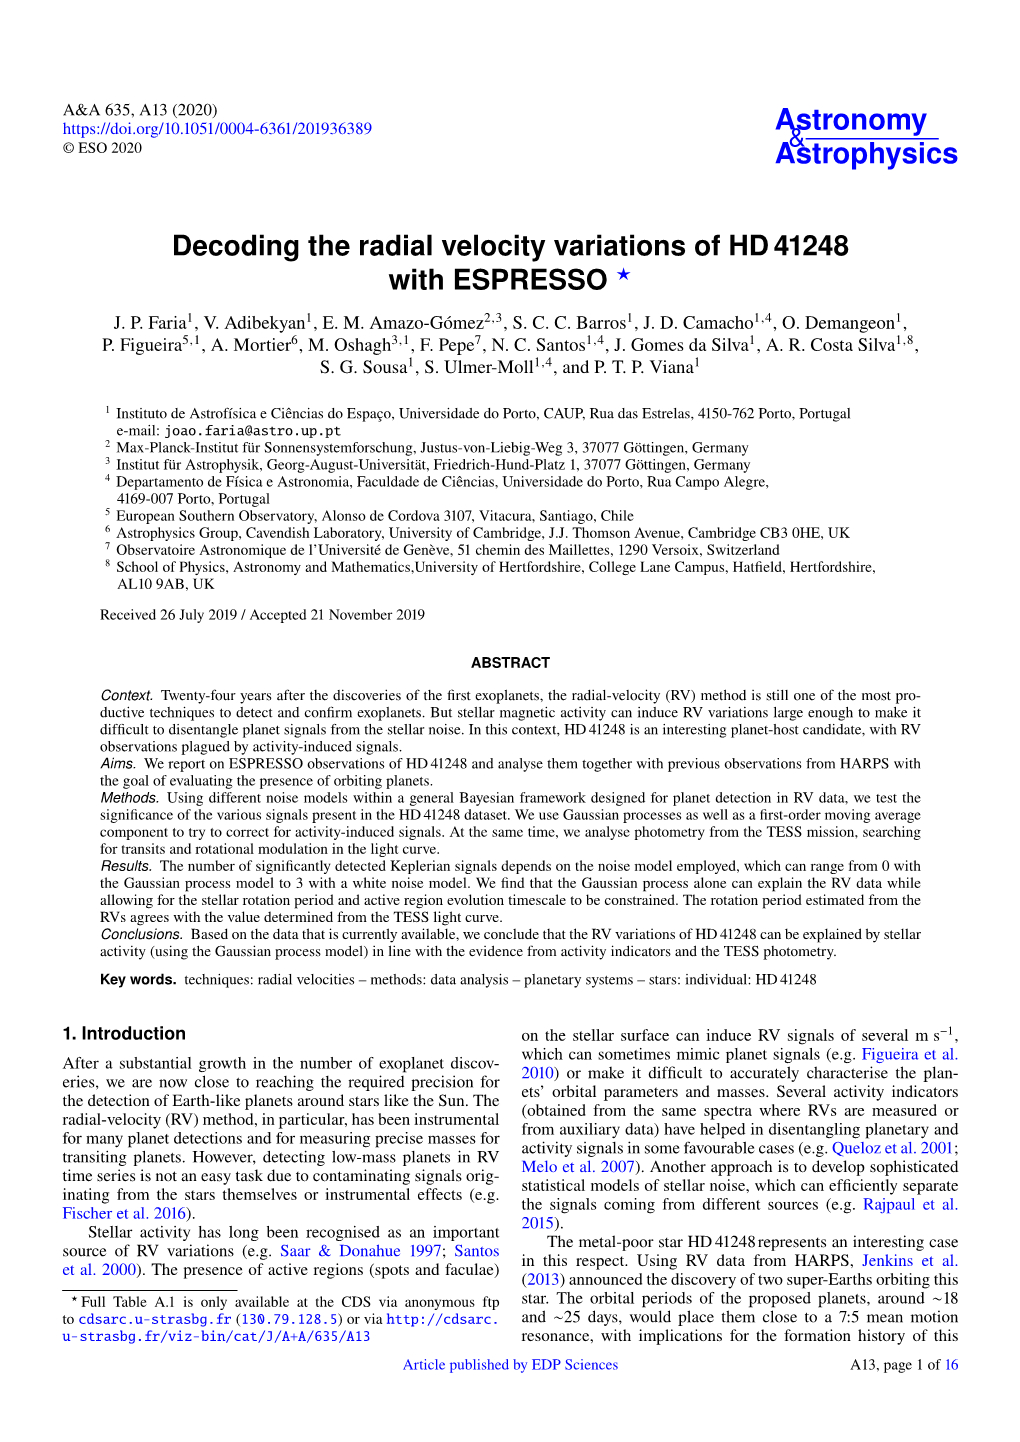 Decoding the Radial Velocity Variations of HD 41248 with ESPRESSO ? J